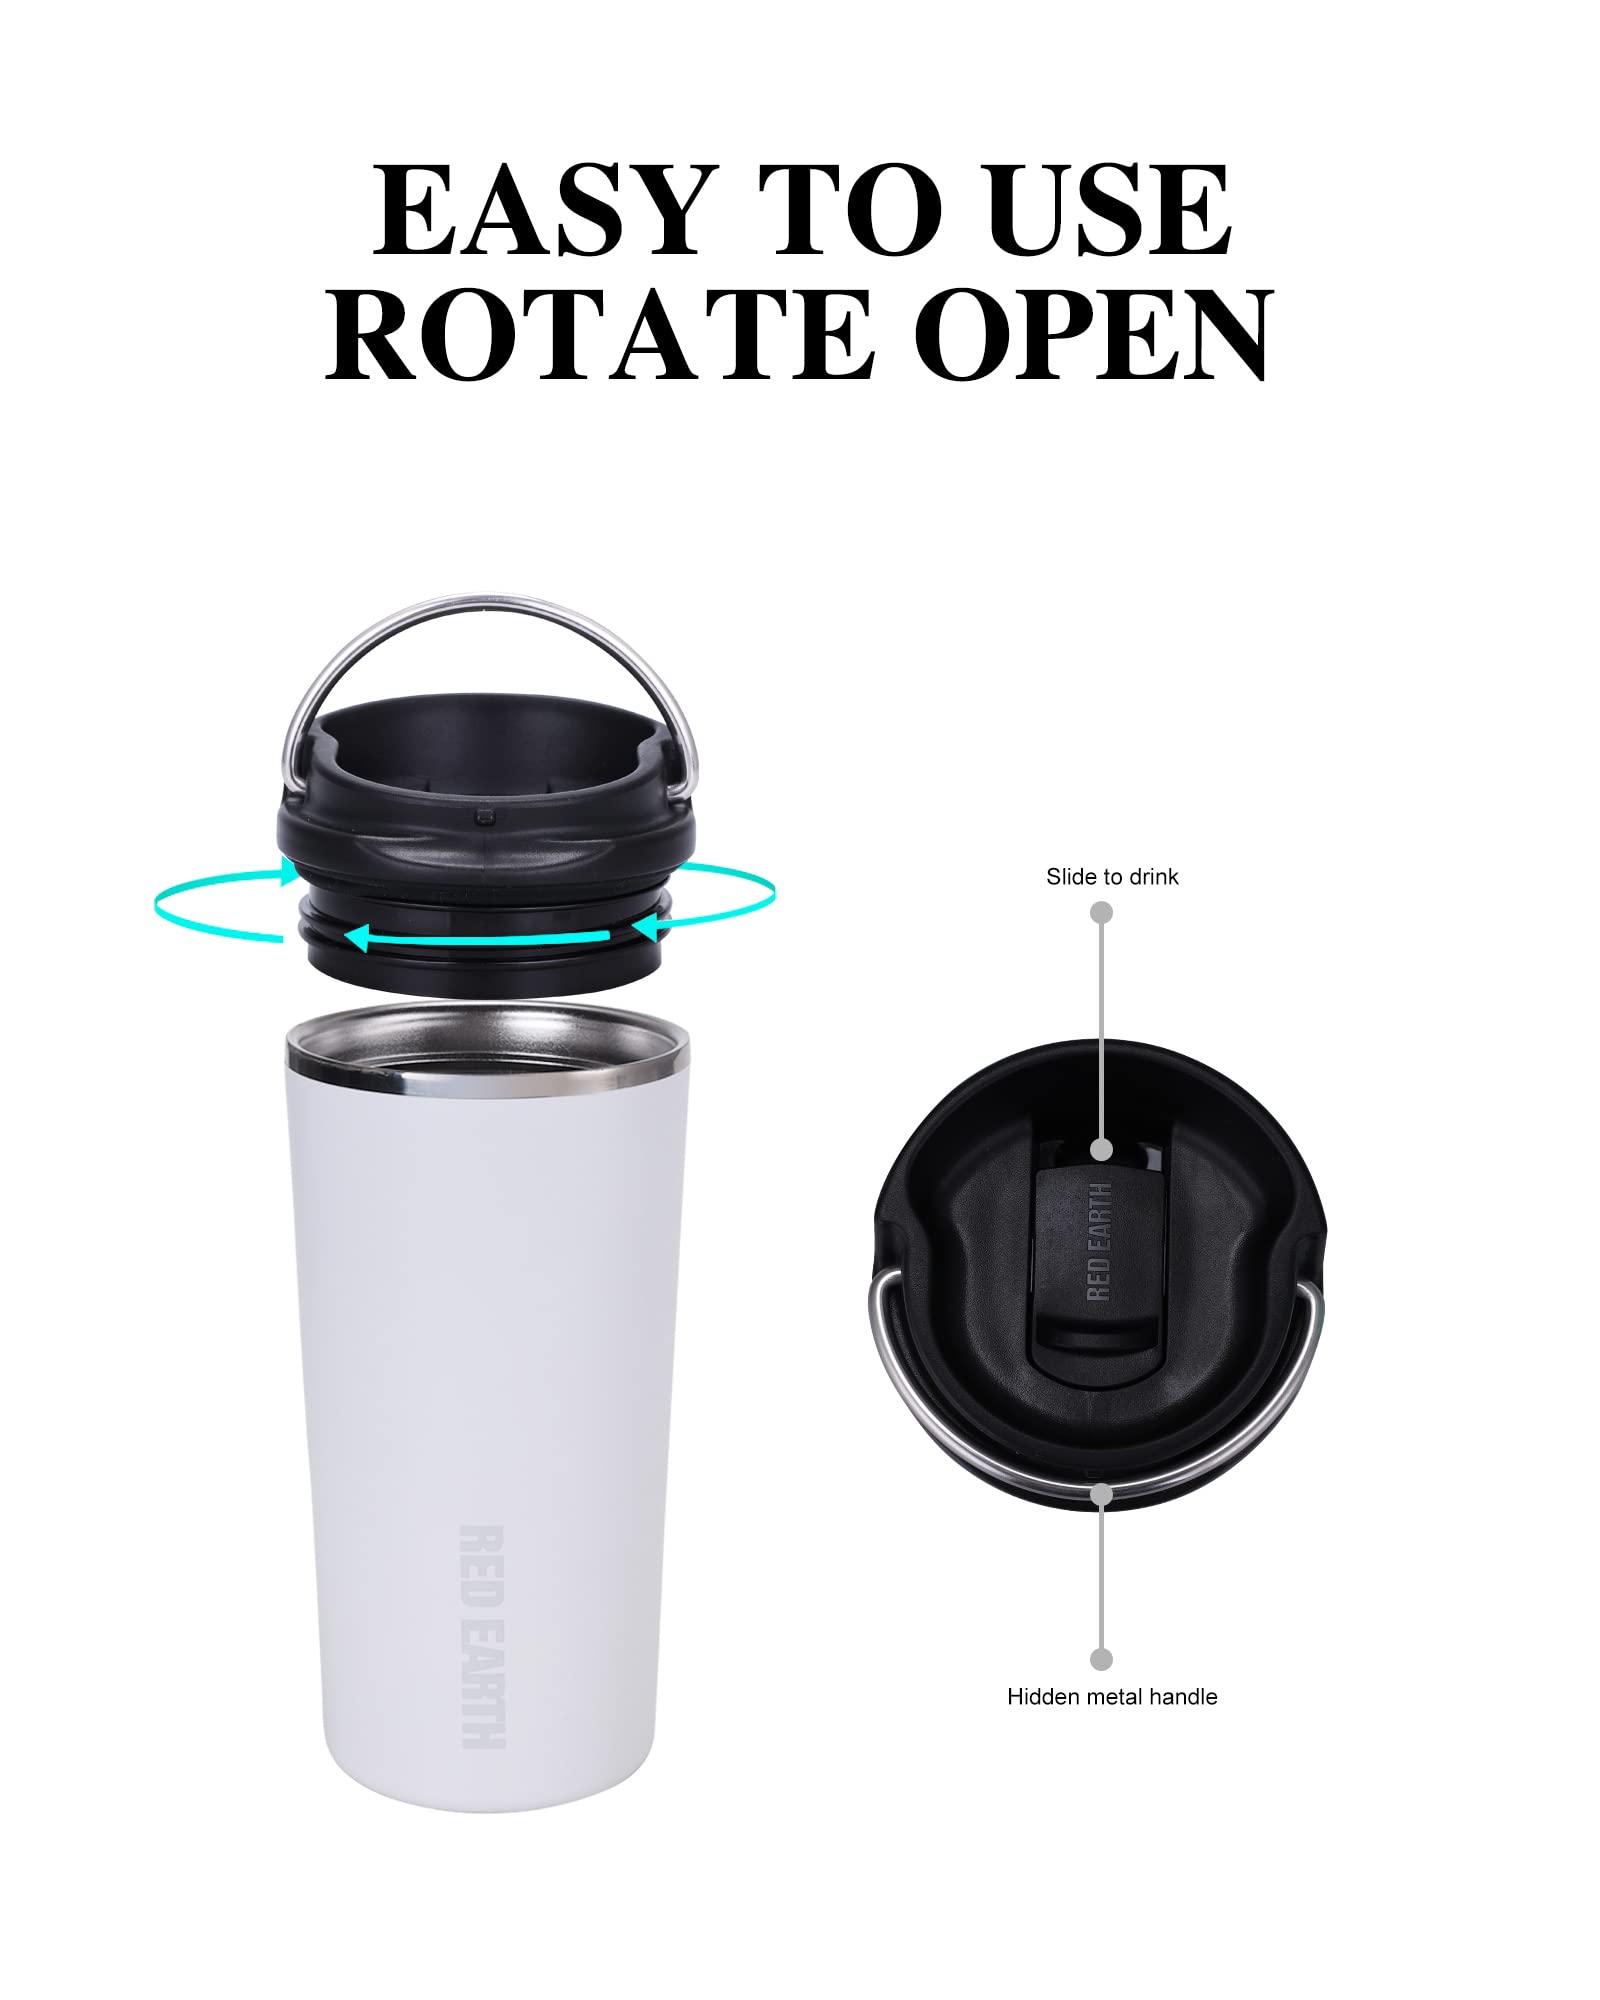 GiNT 17oz Travel Tea Mug with Infuser and Two Lids. Vacuum Insulated 316 Stainless Steel Travel Coffee Mug. Dishwasher Safe Tea Cup with Tea Strainer for Hot and Cold Brew Coffee or Tea(White)